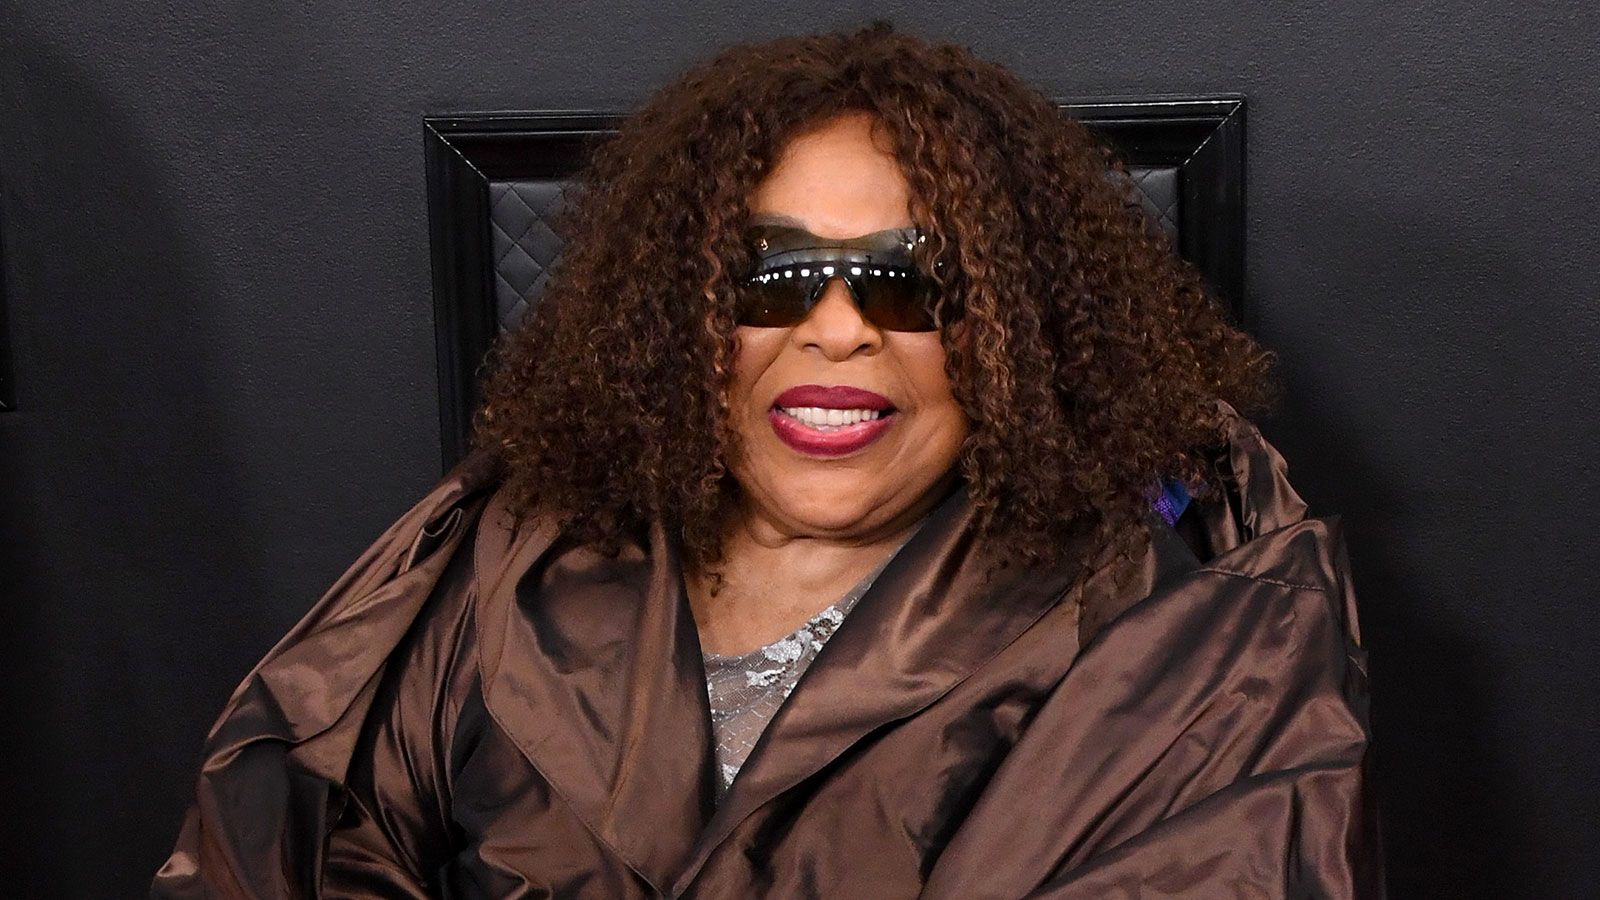 Roberta Flack Net Worth - Fortune Of Jazz Singer With Soulful Music